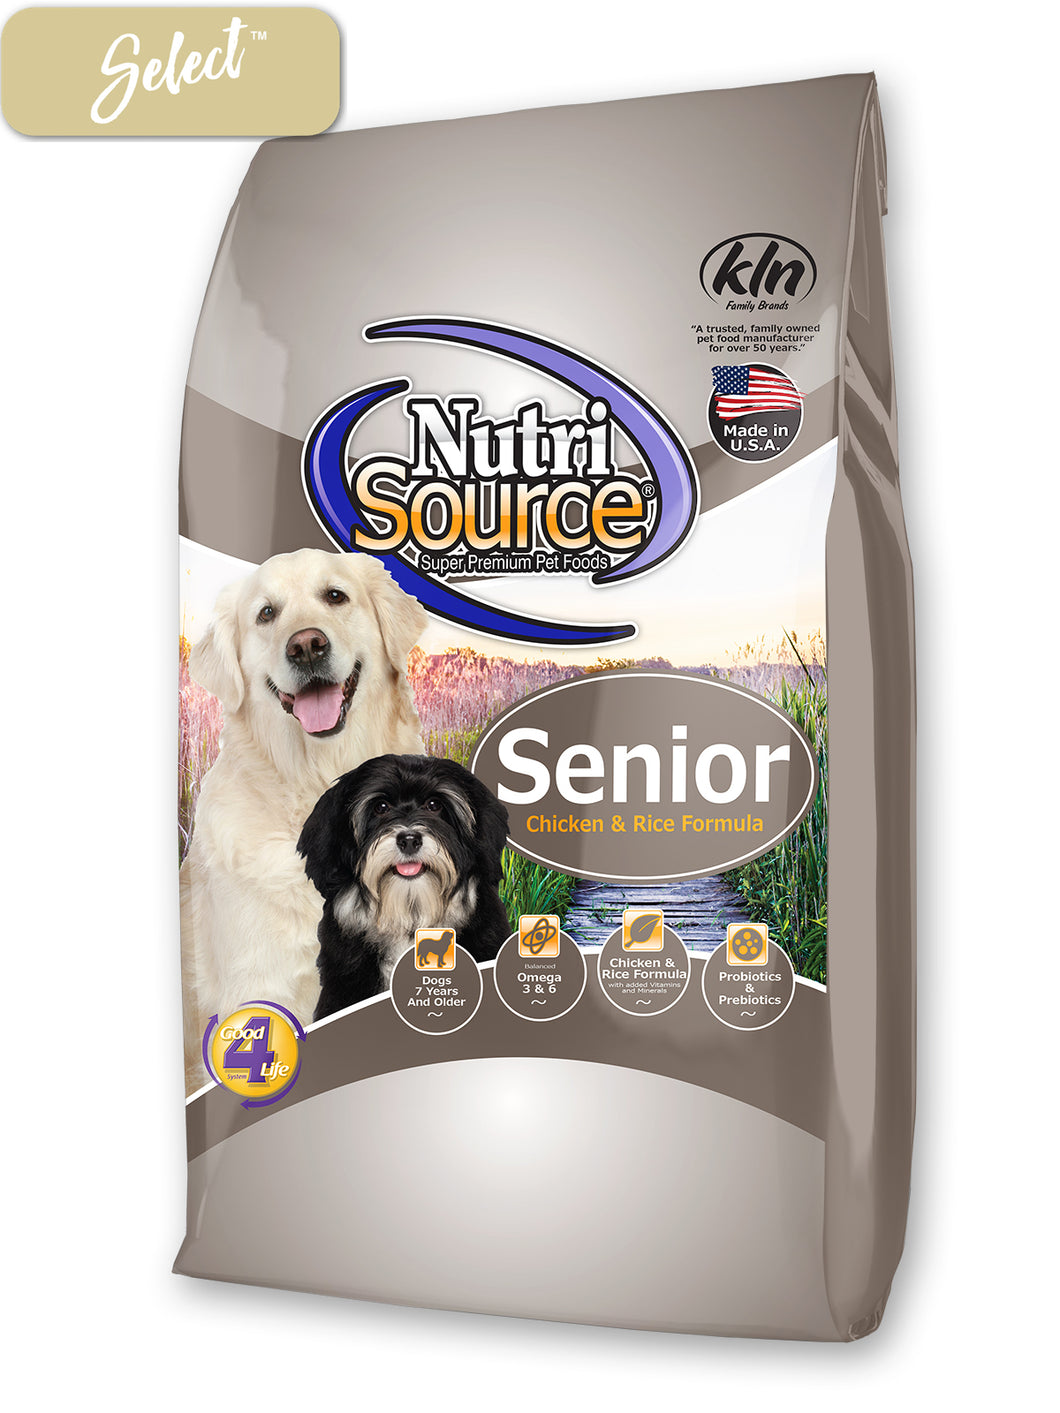 Nutrisource Senior Chicken and Rice Dog Food